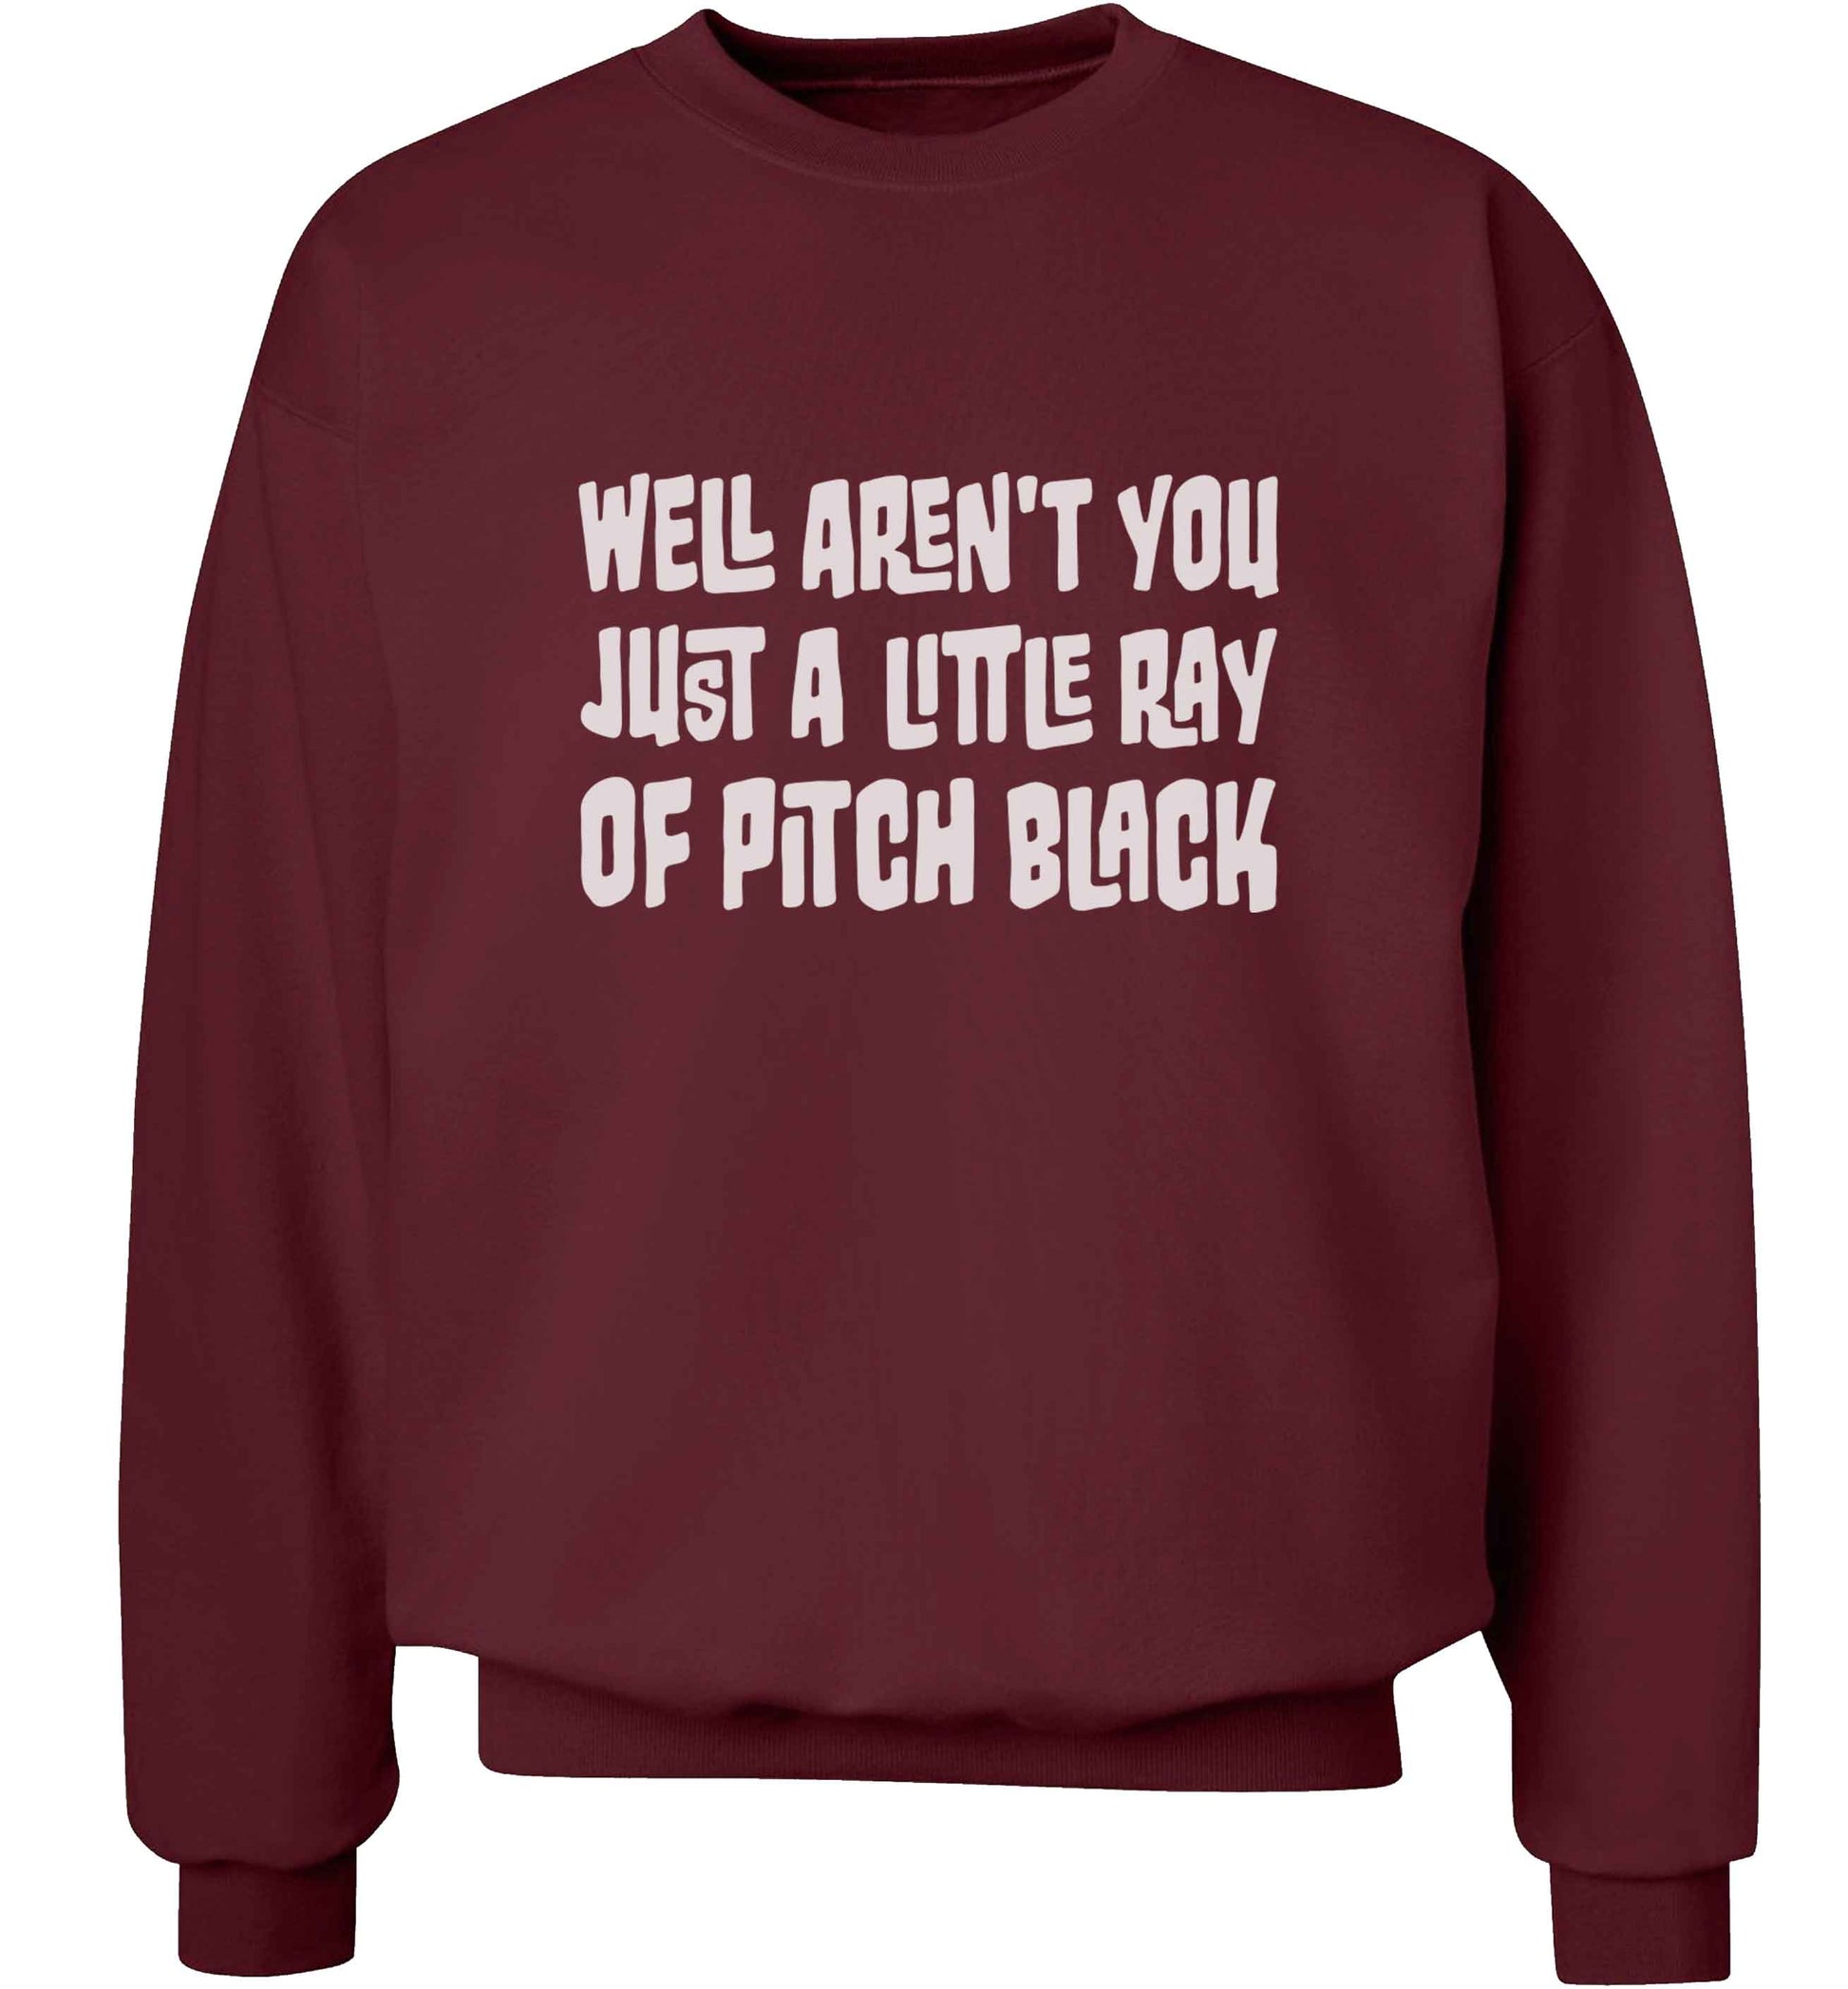 Well aren't you just a little ray of pitch black Kit adult's unisex maroon sweater 2XL